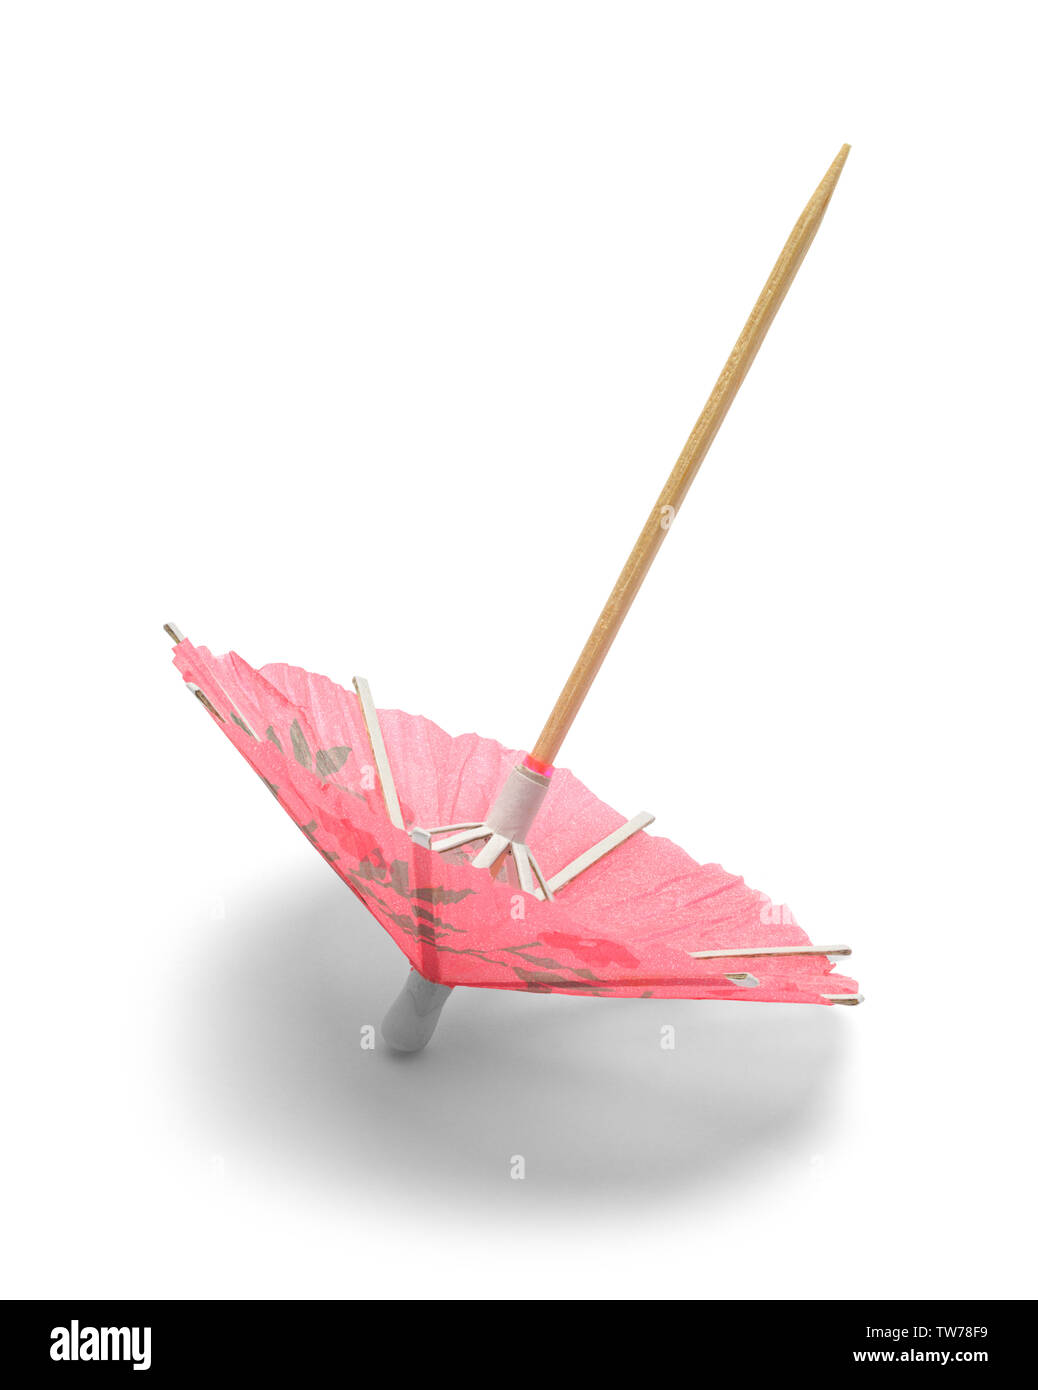 Pink Cocktail Umbrella Tipped Over Isolated on White. Stock Photo